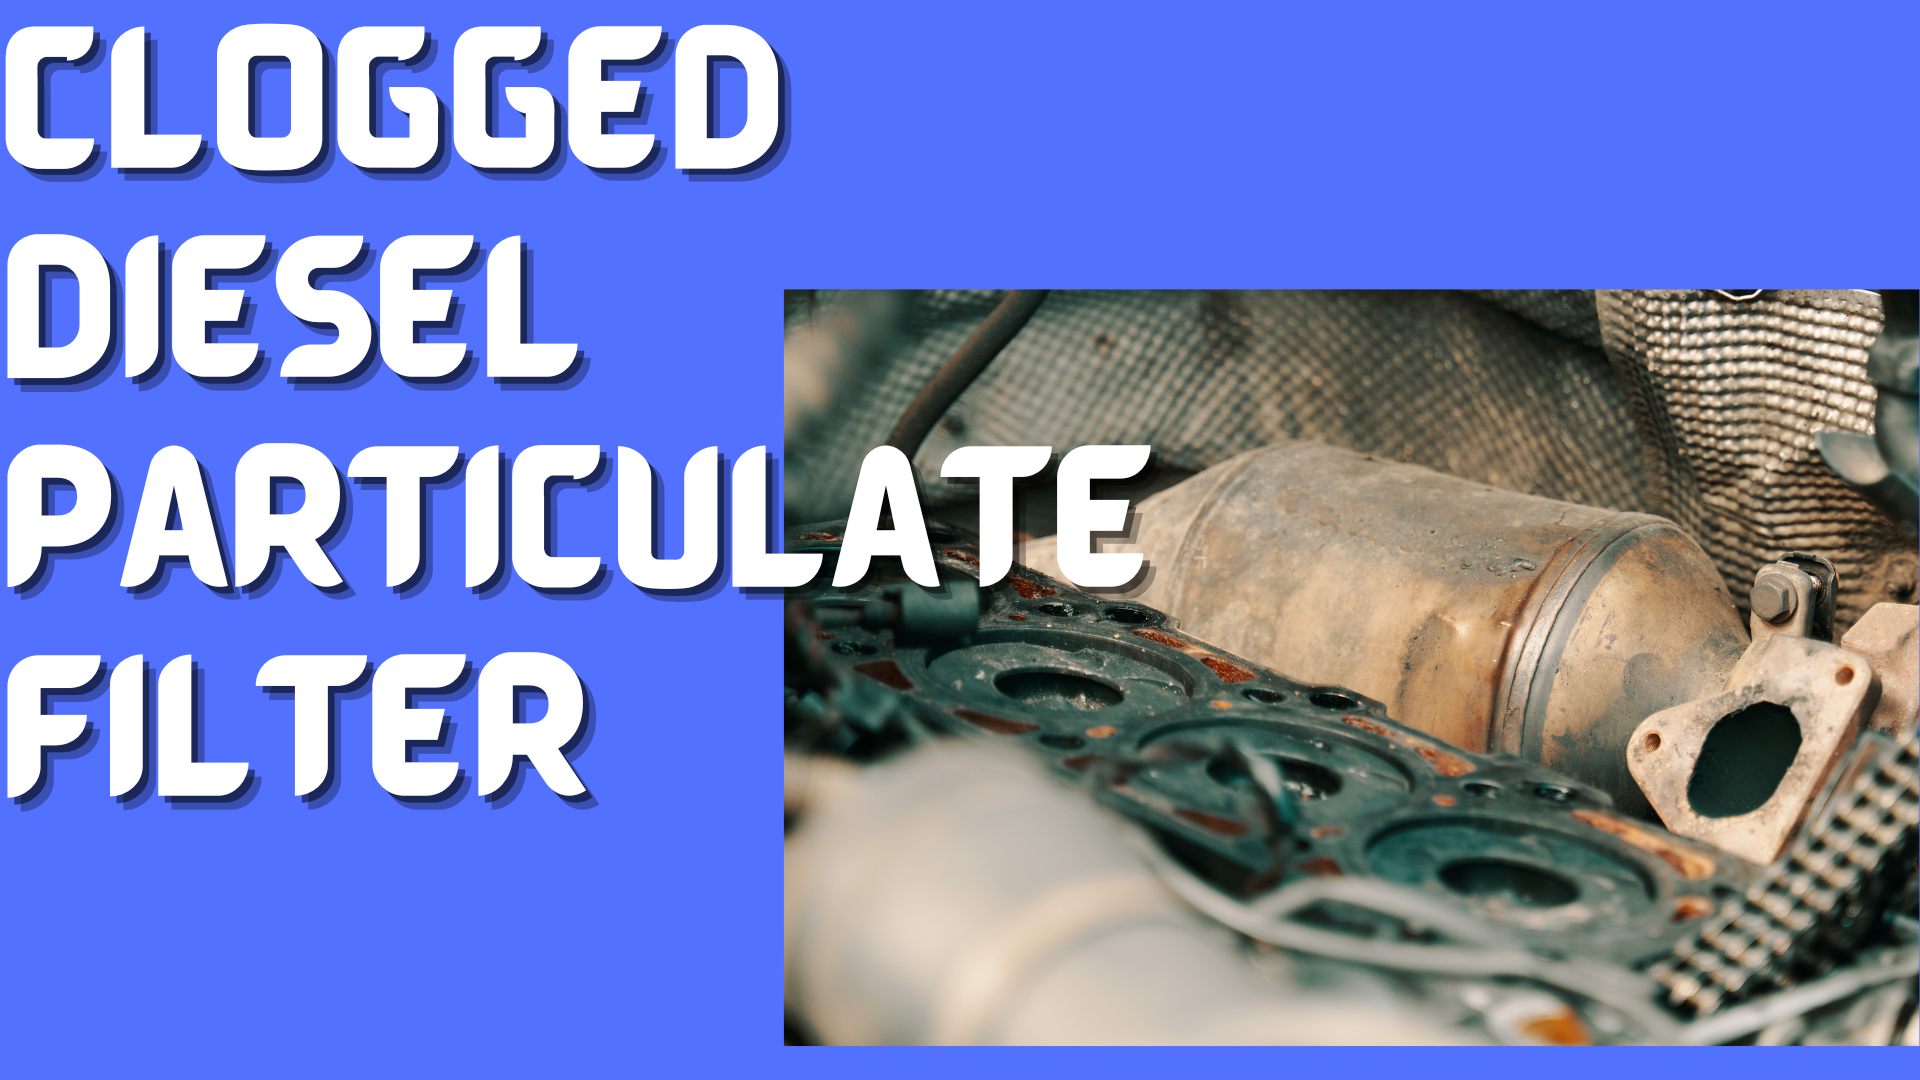 How to Deal with a Clogged Diesel Particulate Filter of a Truck